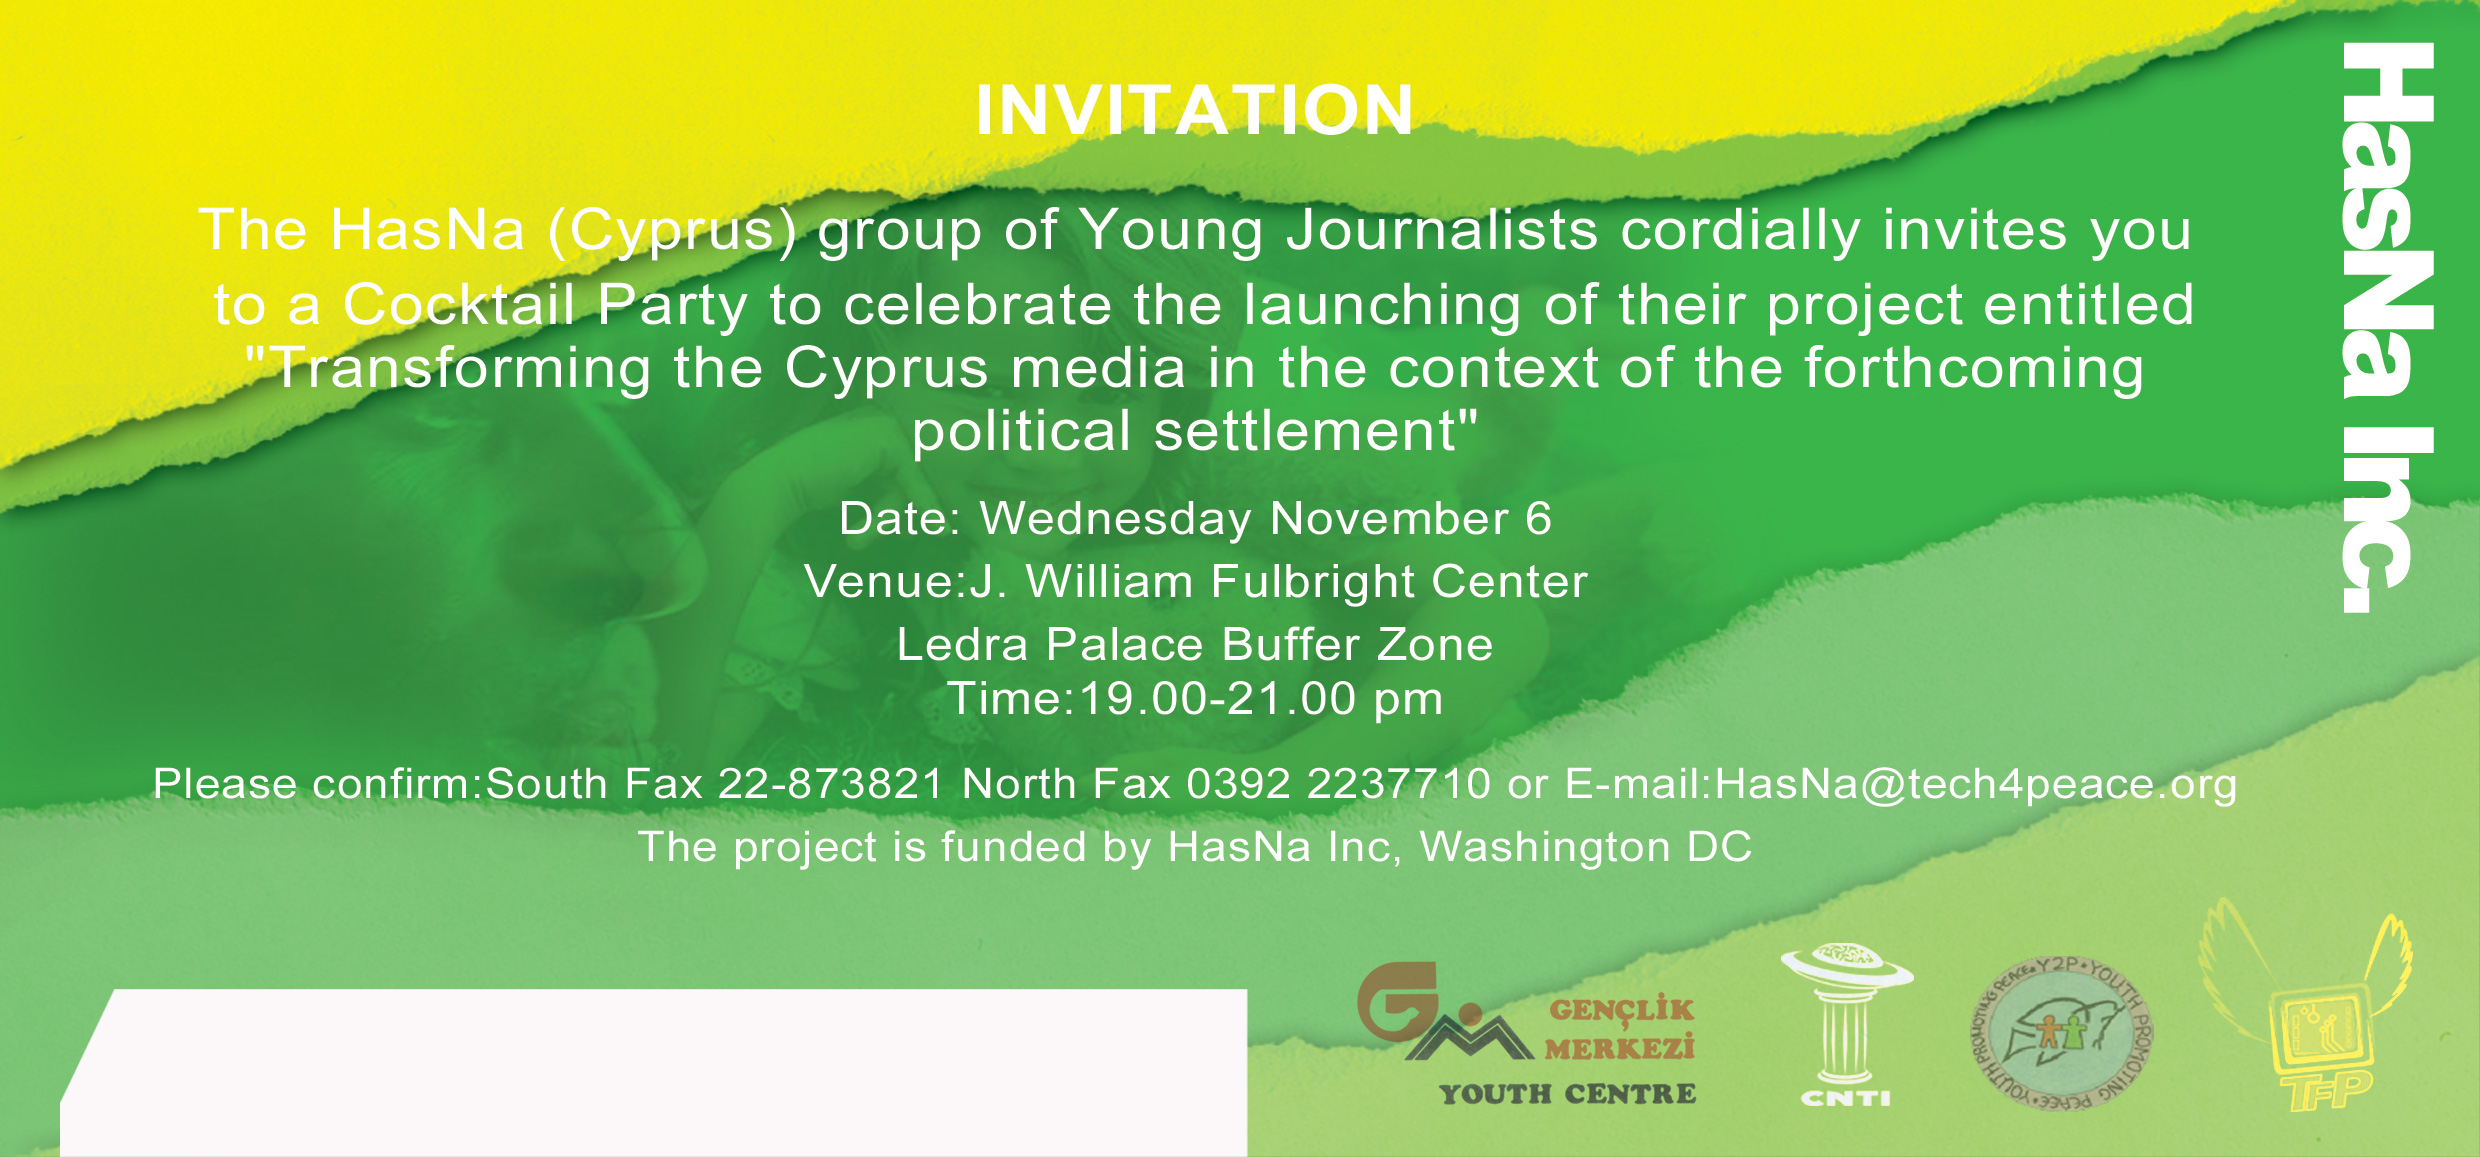 HasNa Inv YoungJournalists 6 11 02.jpg